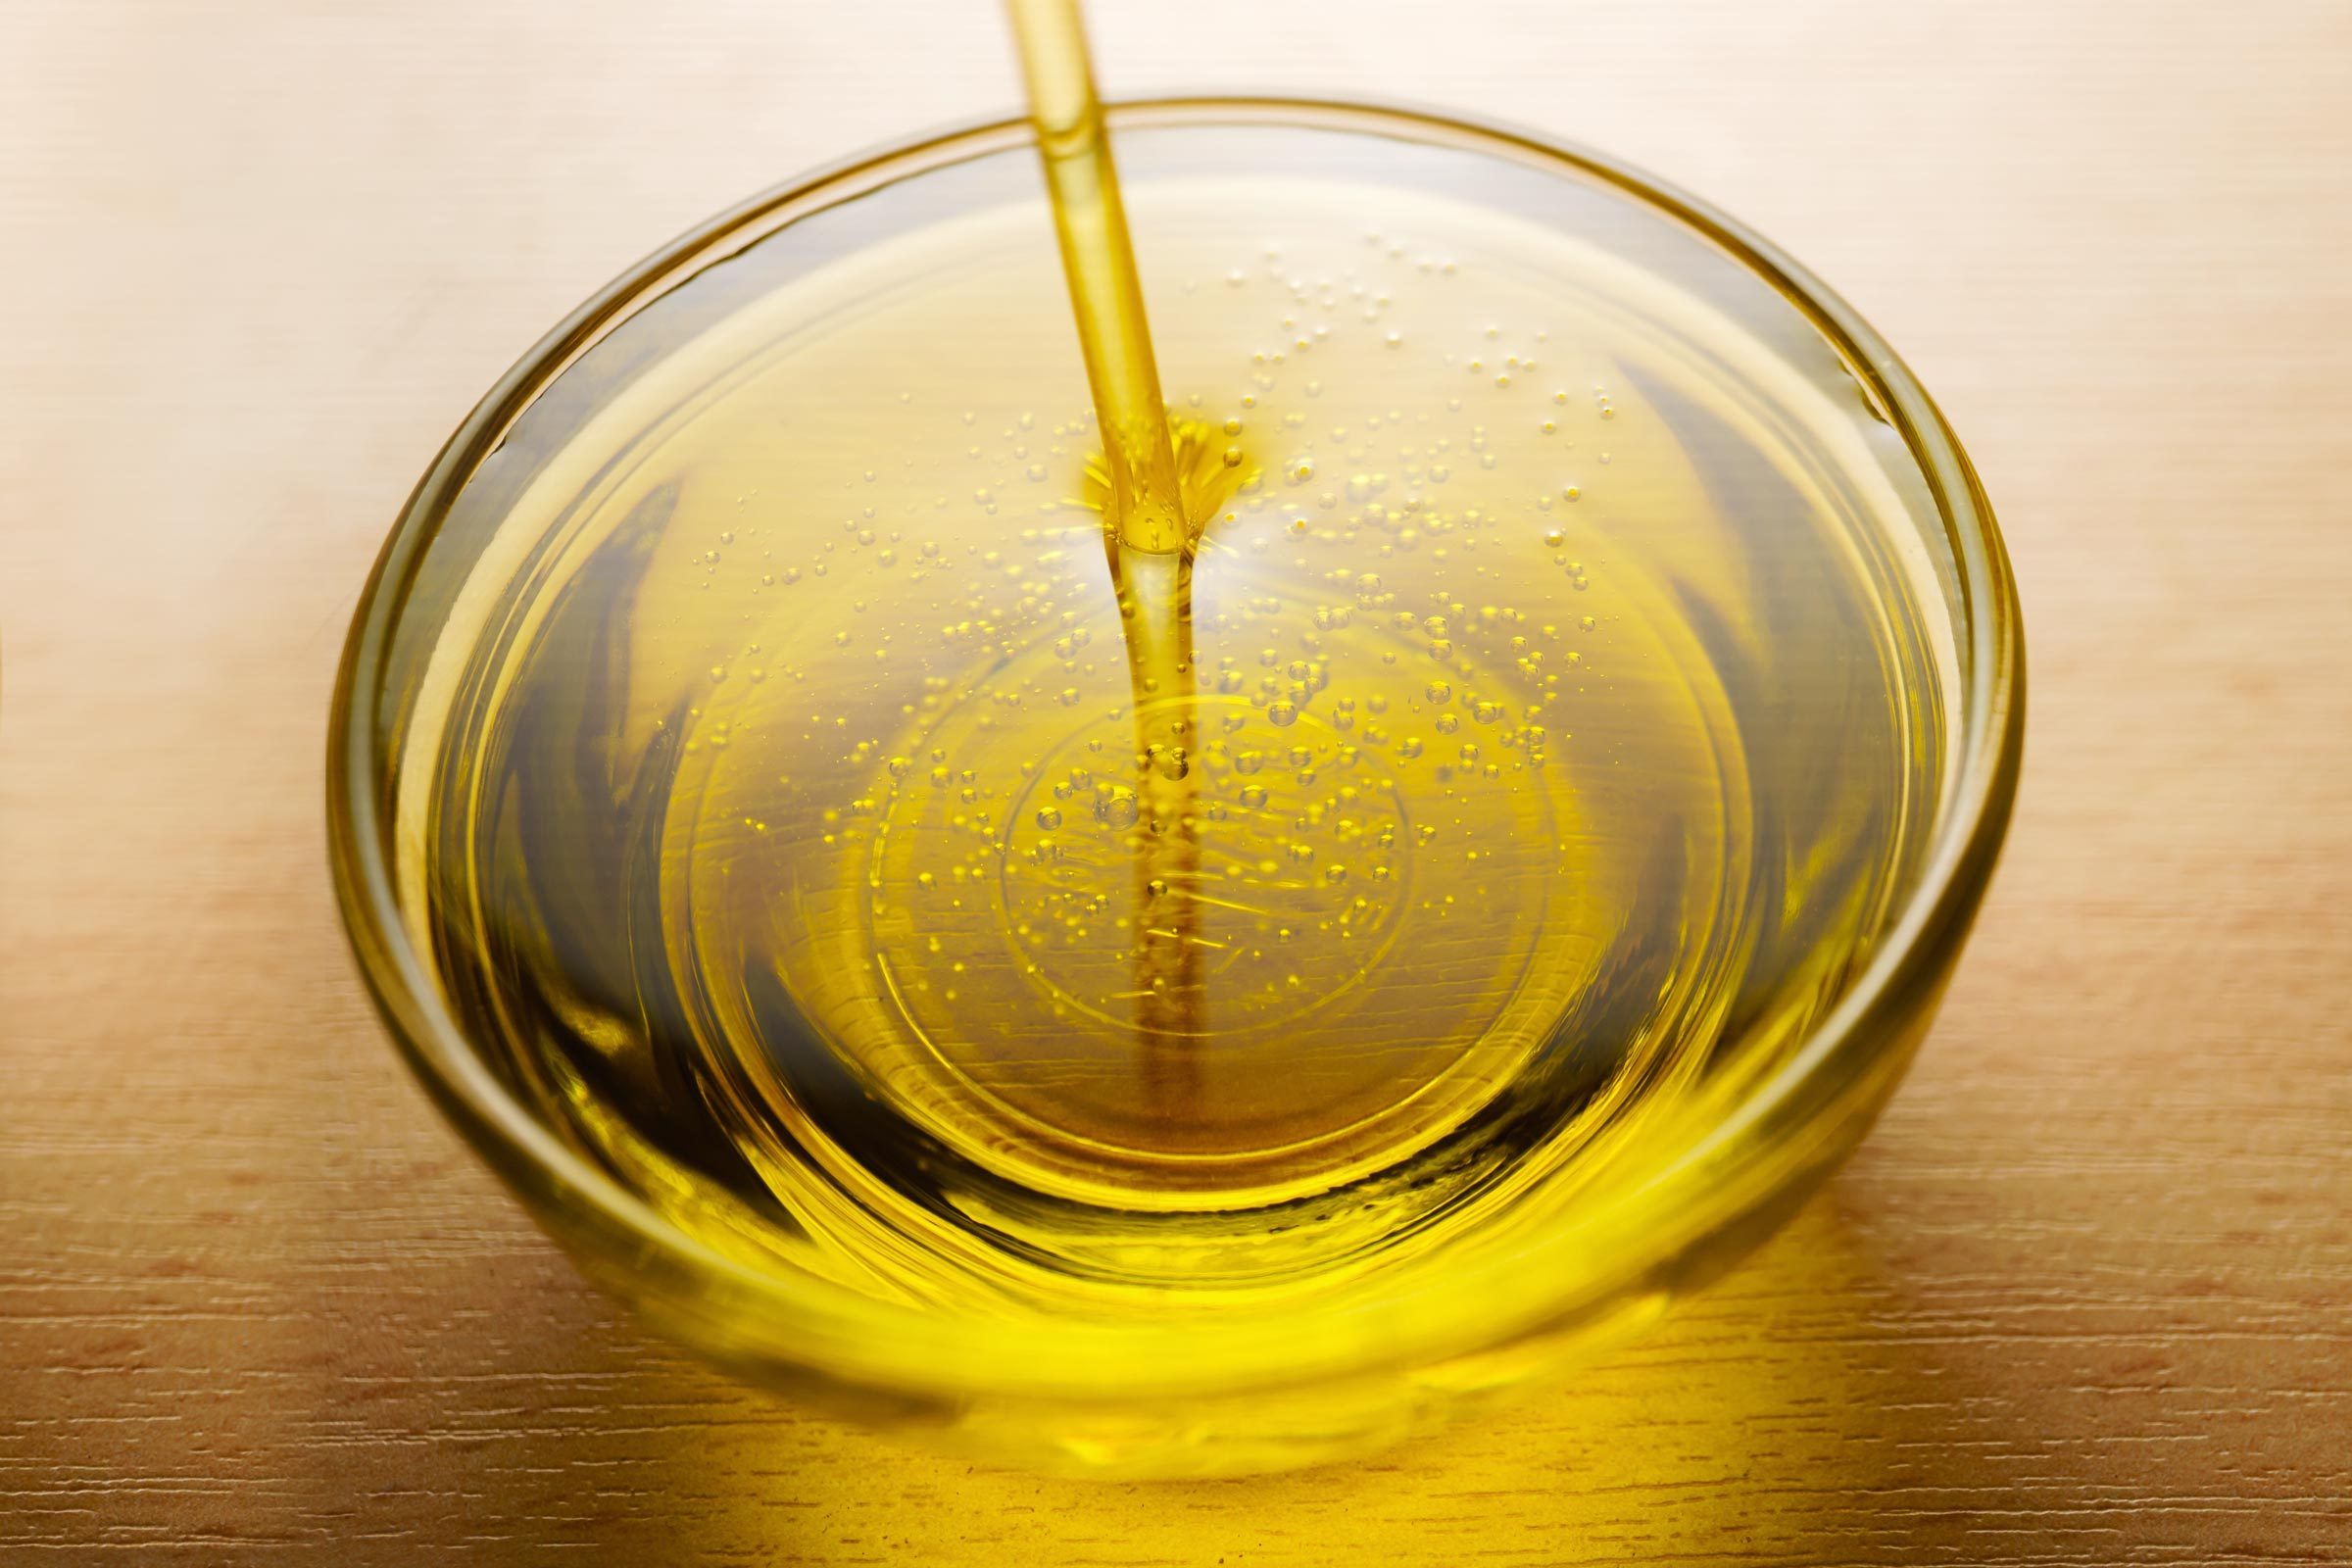 New Harvard Study: In Addition to Its Heart Benefits, Olive Oil May Reduce Dementia Risk by 28%